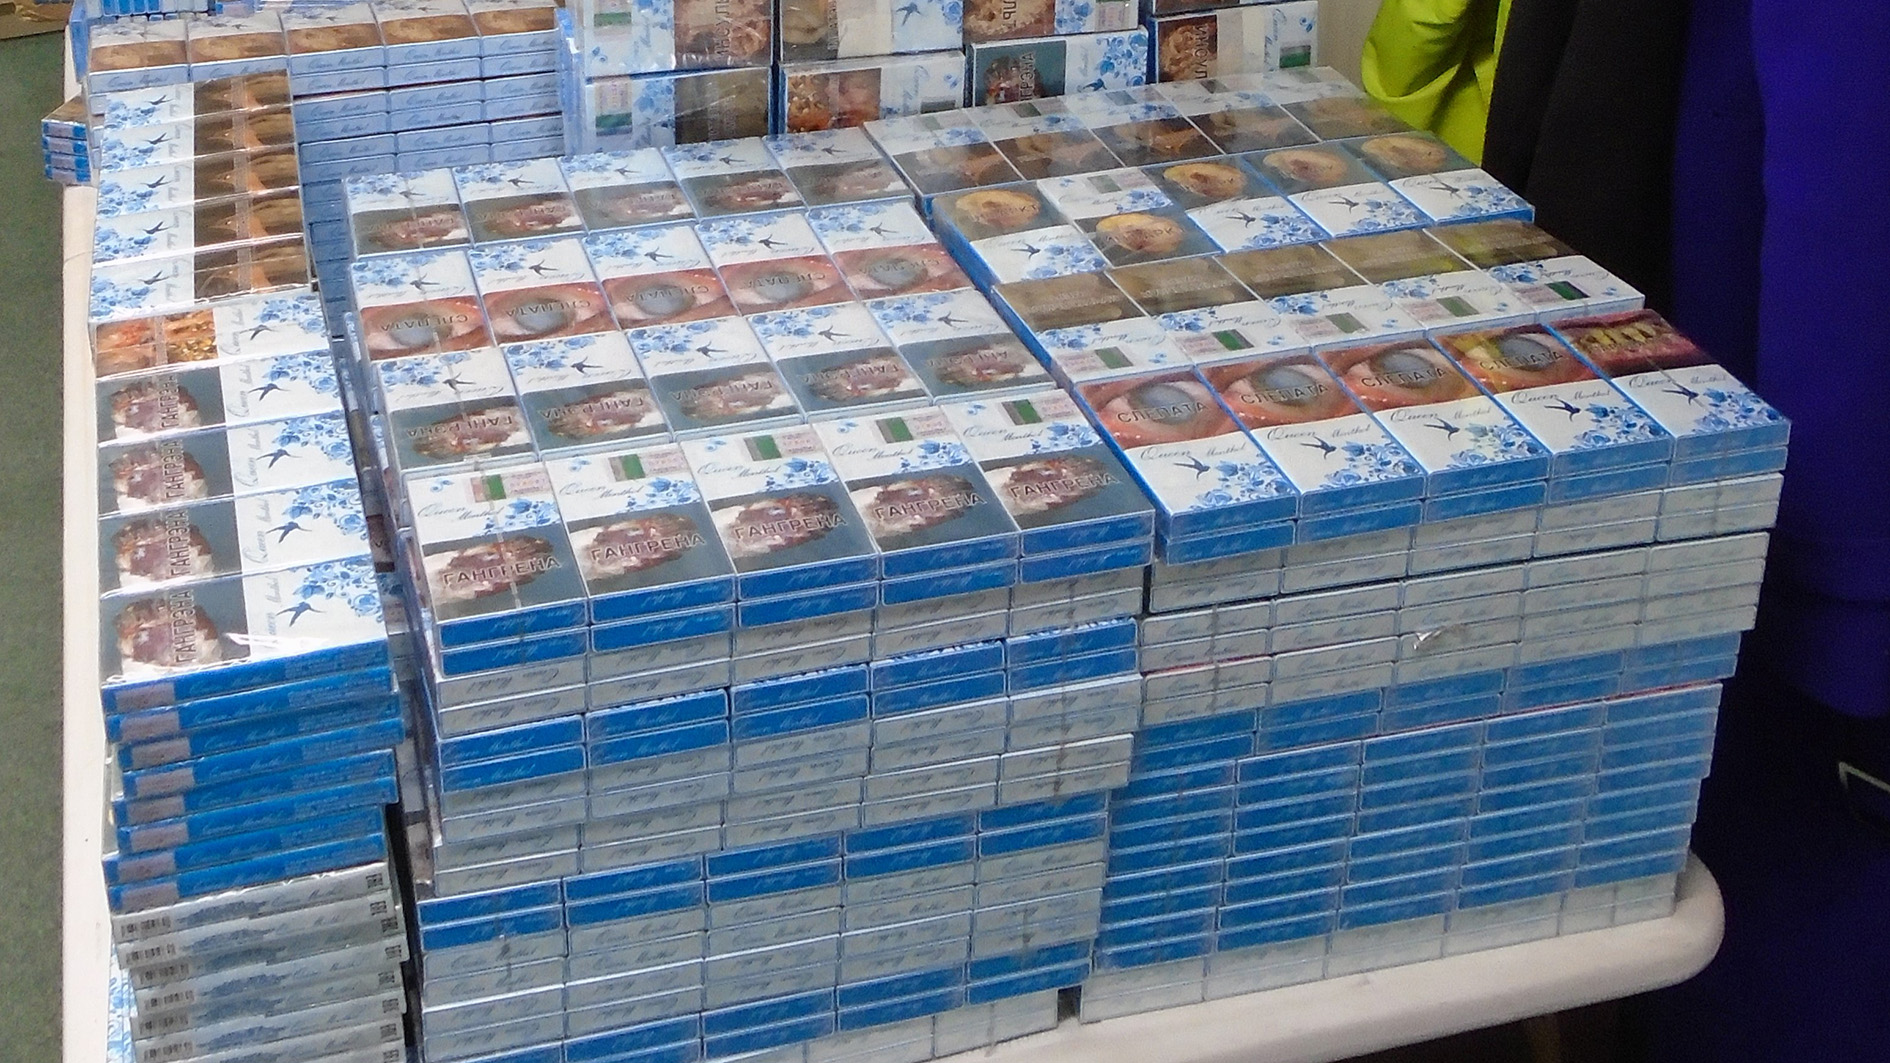 A table piled high with over 70,000 illegal cigarettes